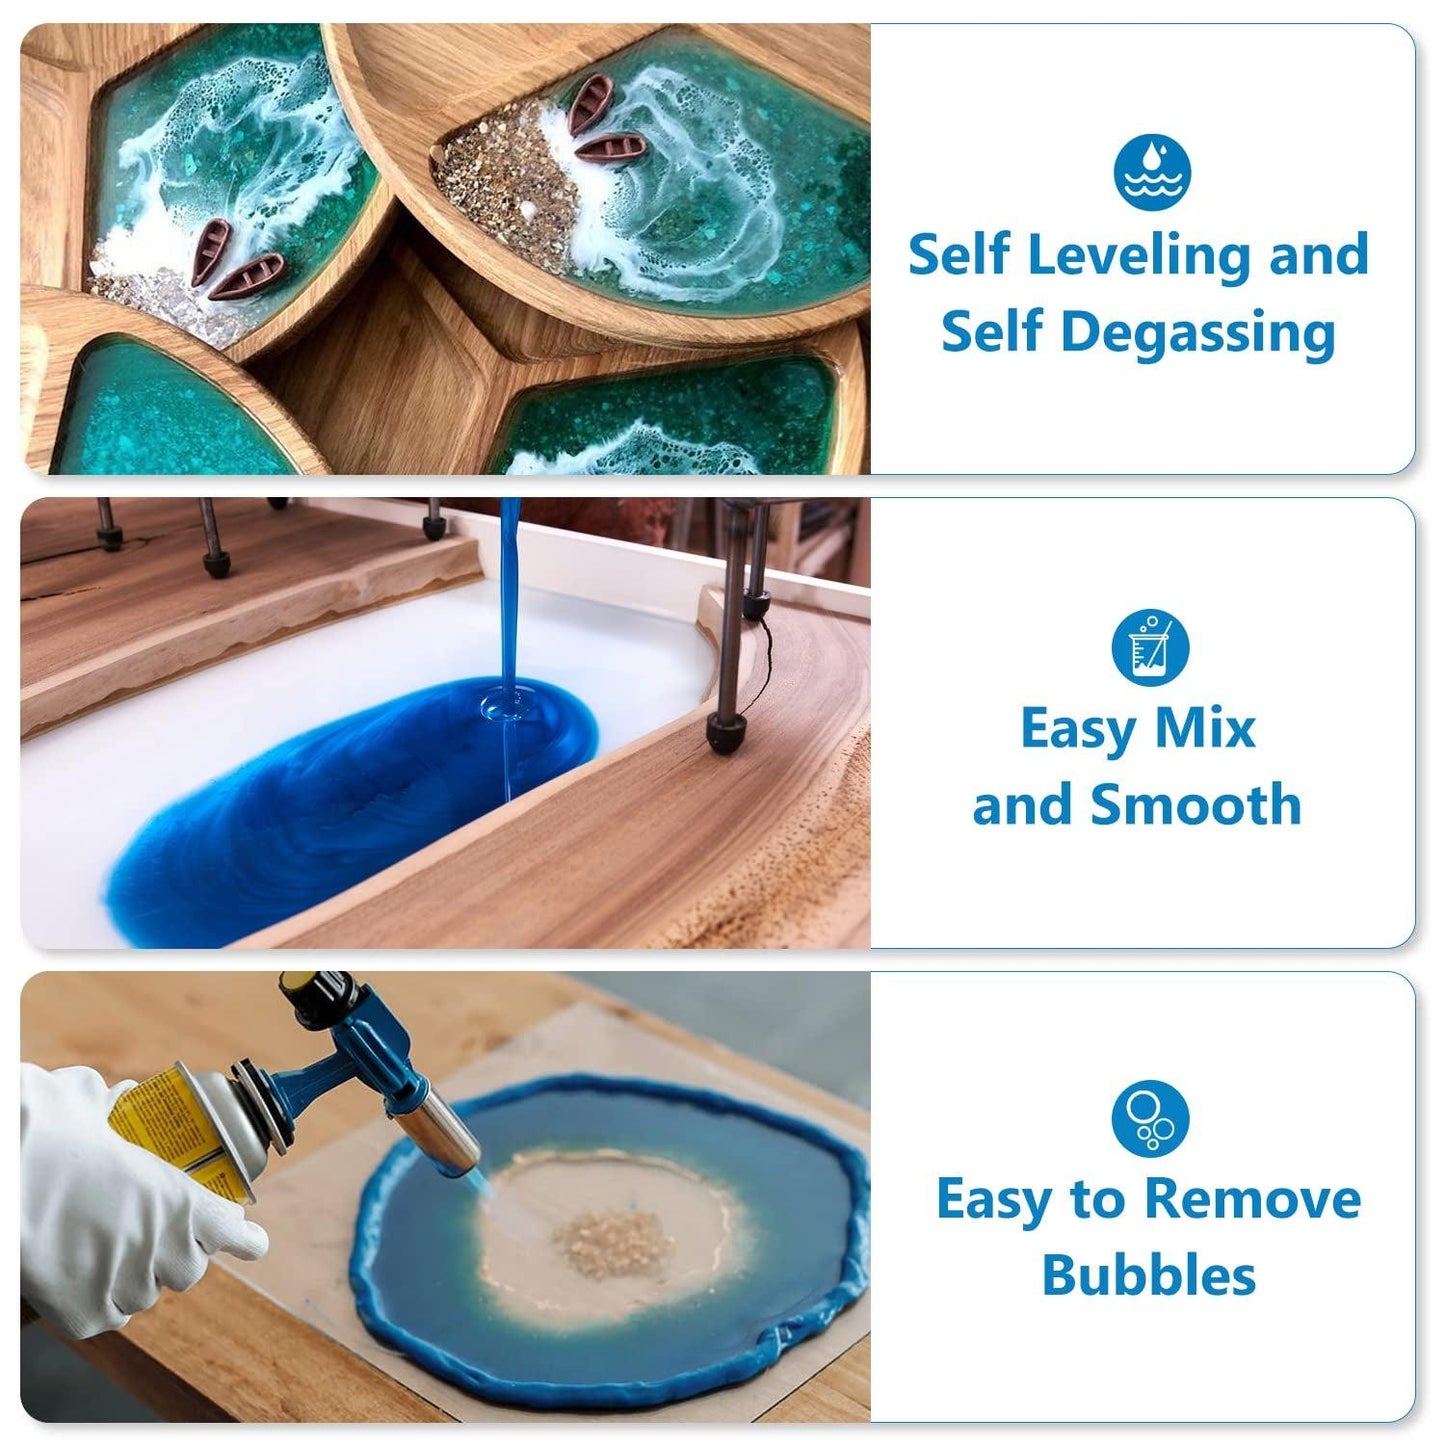 Epoxy Resin 1 Gallon Kit, Crystal Clear Epoxy Tabletop Resin Self Leveling, Bubbles Free and Anti-Yellowing, Rivertop Resin 1 Gallon 2 Part Epoxy for Coating & Casting, Mix Ratio 1:1 - WoodArtSupply